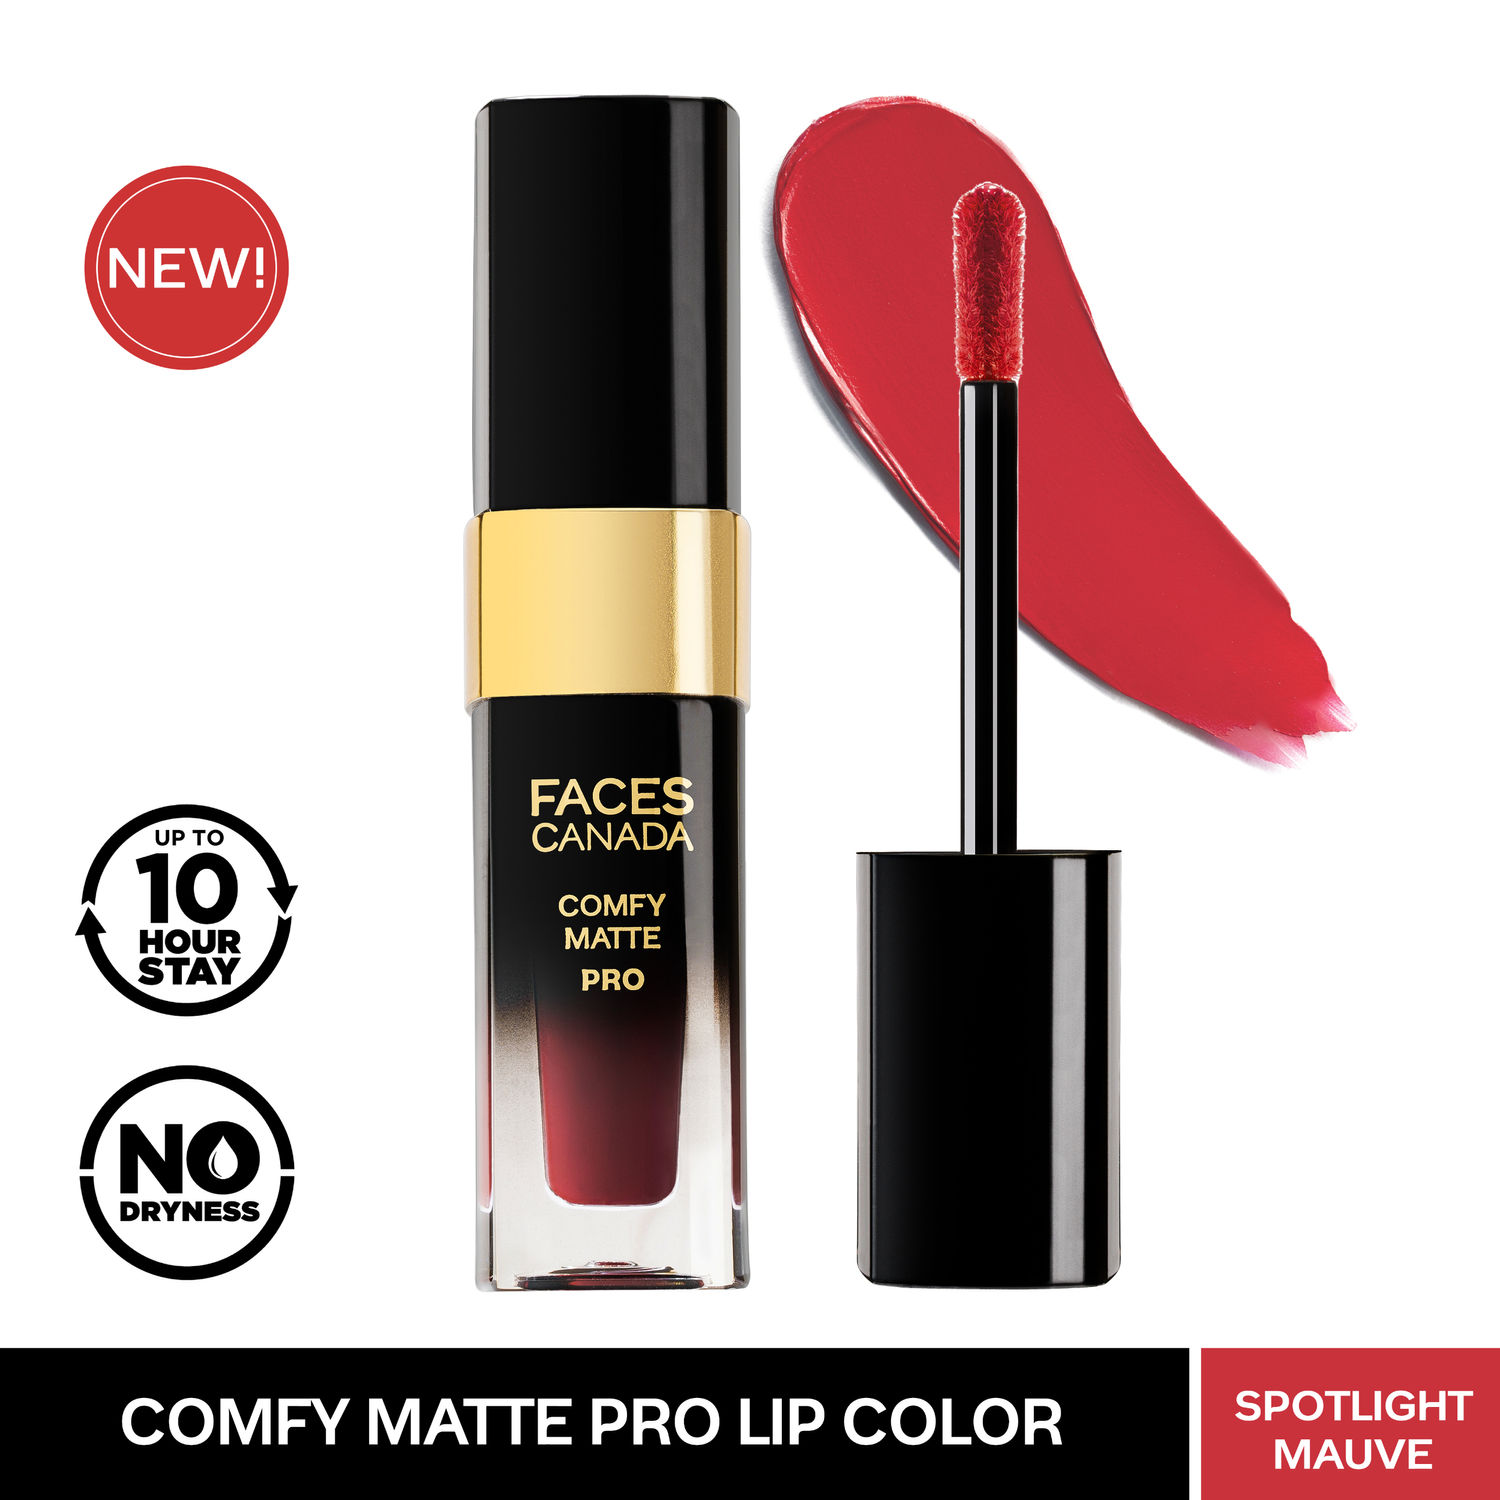 Buy FACES CANADA Comfy Matte Pro Liquid Lipstick - Spotlight Mauve 11, 5.5 ml | 10HR Longstay | Intense Color | Macadamia Oil & Olive Butter Infused | Lightweight Super Smooth | No Dryness | No Alcohol - Purplle